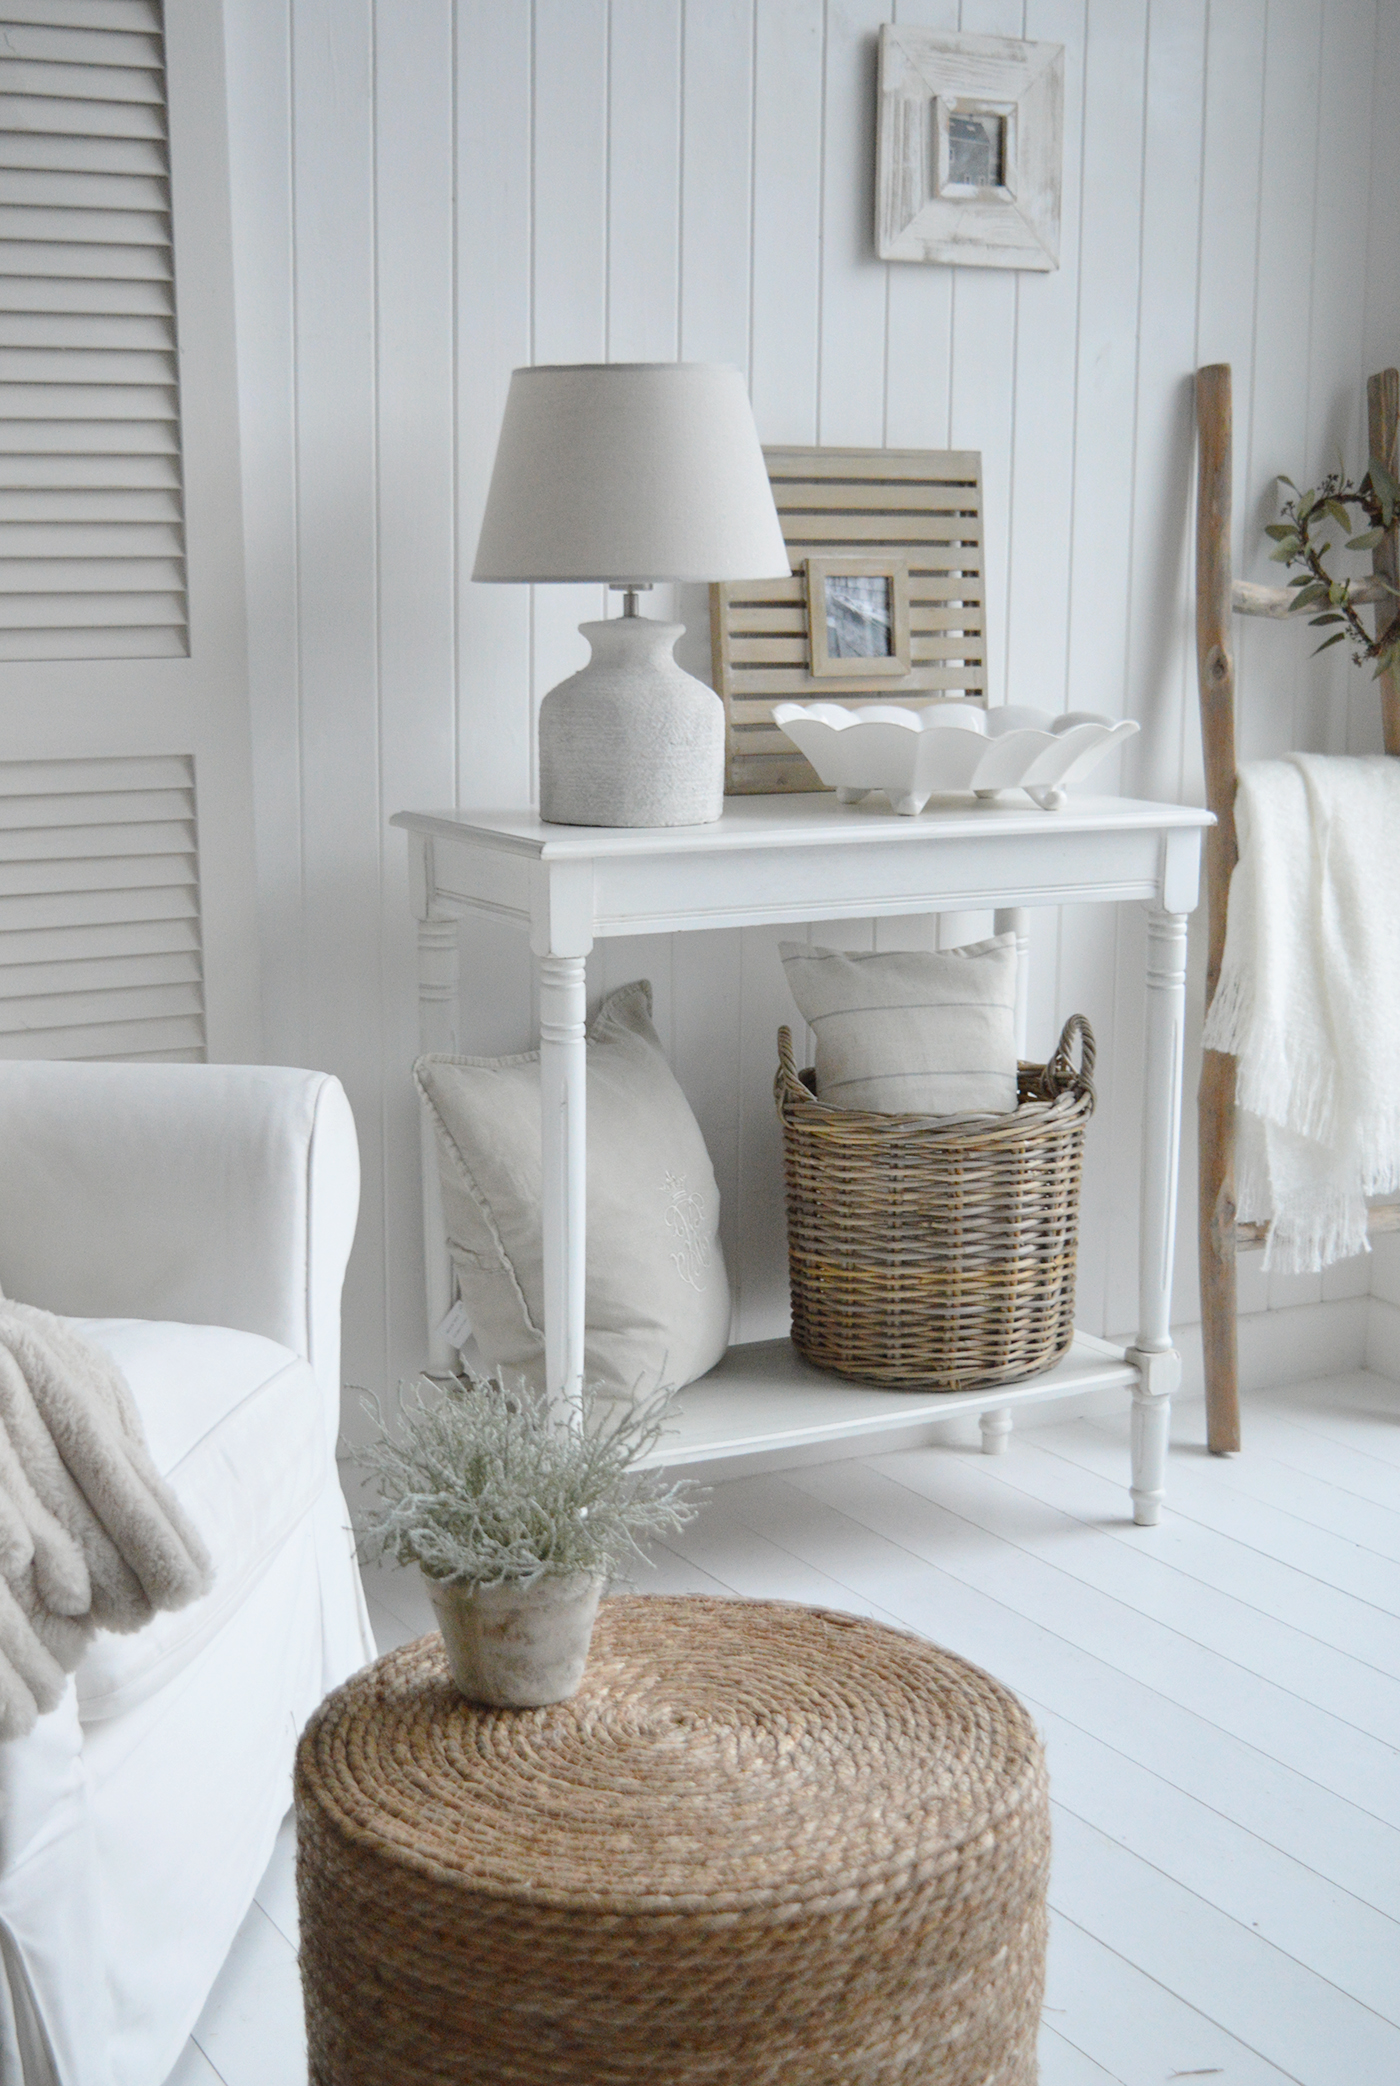 A New England modern famhouse style interior with white furniture and home decor accessories